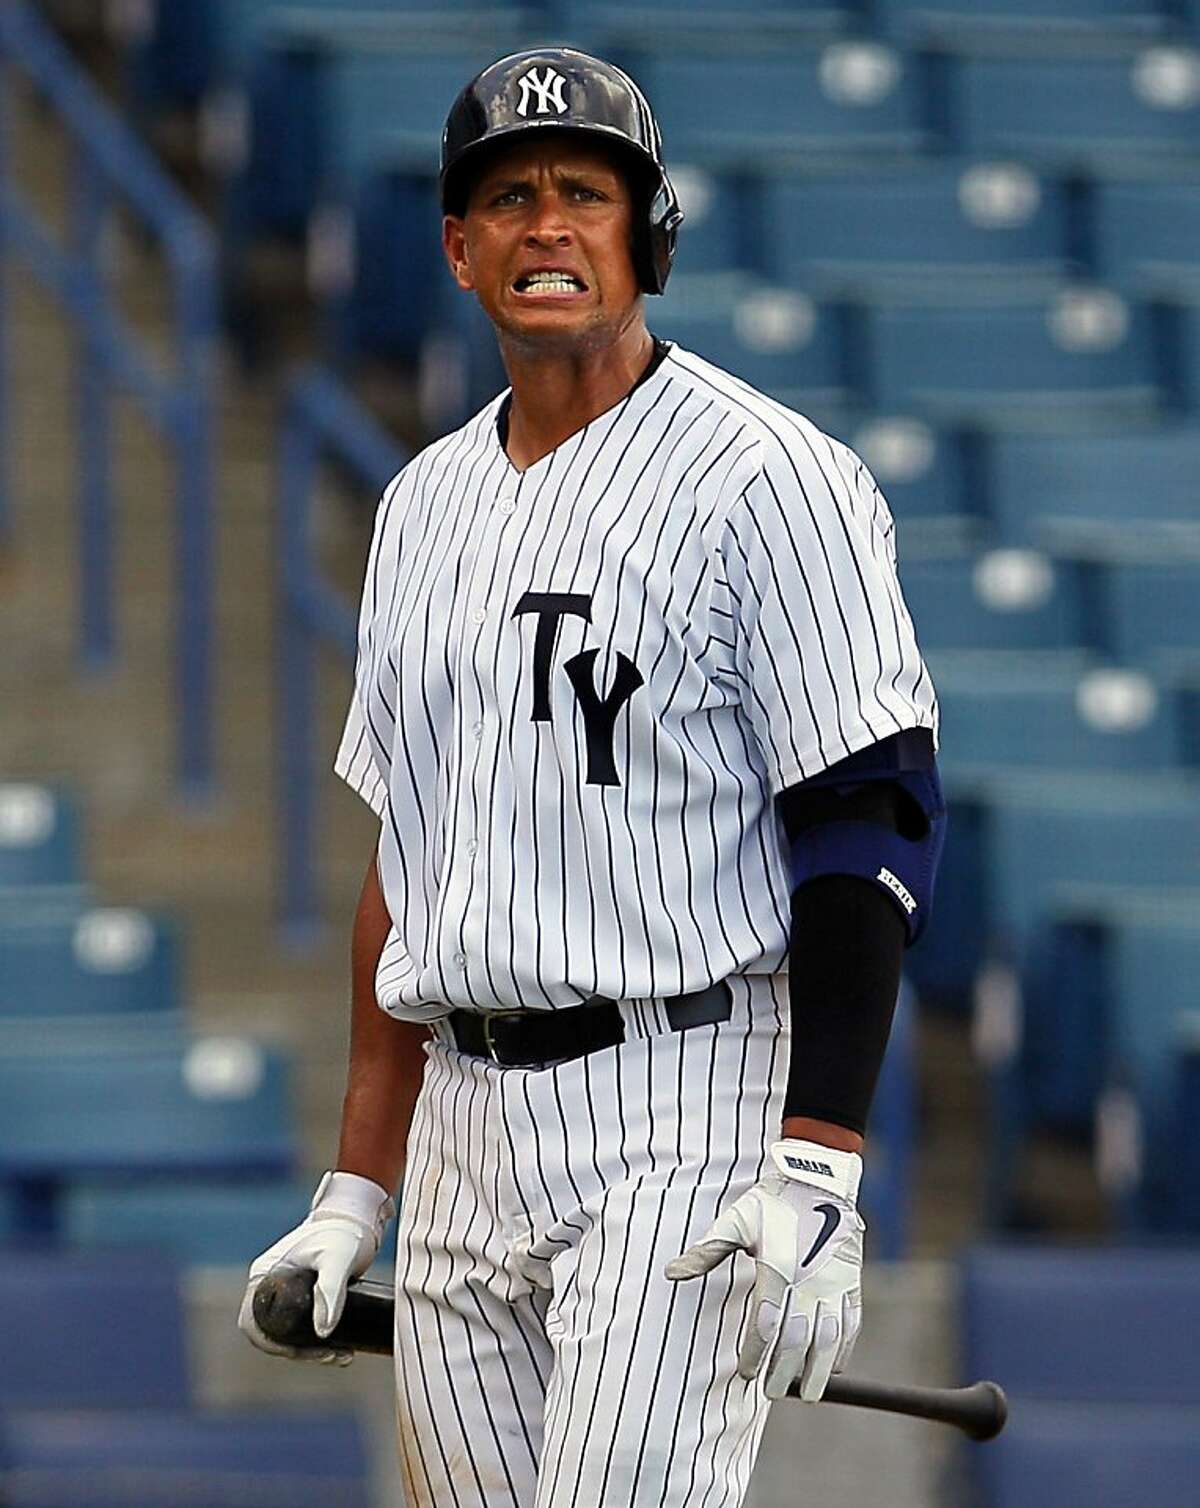 FILE - In this July 9, 2013 file photo, Alex Rodriguez walks back to the bench after striking out in the seventh inning with the Tampa Yankees as they play the Dunedin Blue Jays in Tampa. Much of the focus as baseball heads into the second half is being placed on the possible suspensions of Alex Rodriguez, Ryan Braun and a handful of All-Stars implicated in the Biogenesis performance-enhancing drug scandal. (AP Photo/The Tampa Bay Times, Daniel Wallace) TAMPA OUT; CITRUS COUNTY OUT; PORT CHARLOTTE OUT; BROOKSVILLE HERNANDO OUT; USA TODAY OUT; MAGS OUT